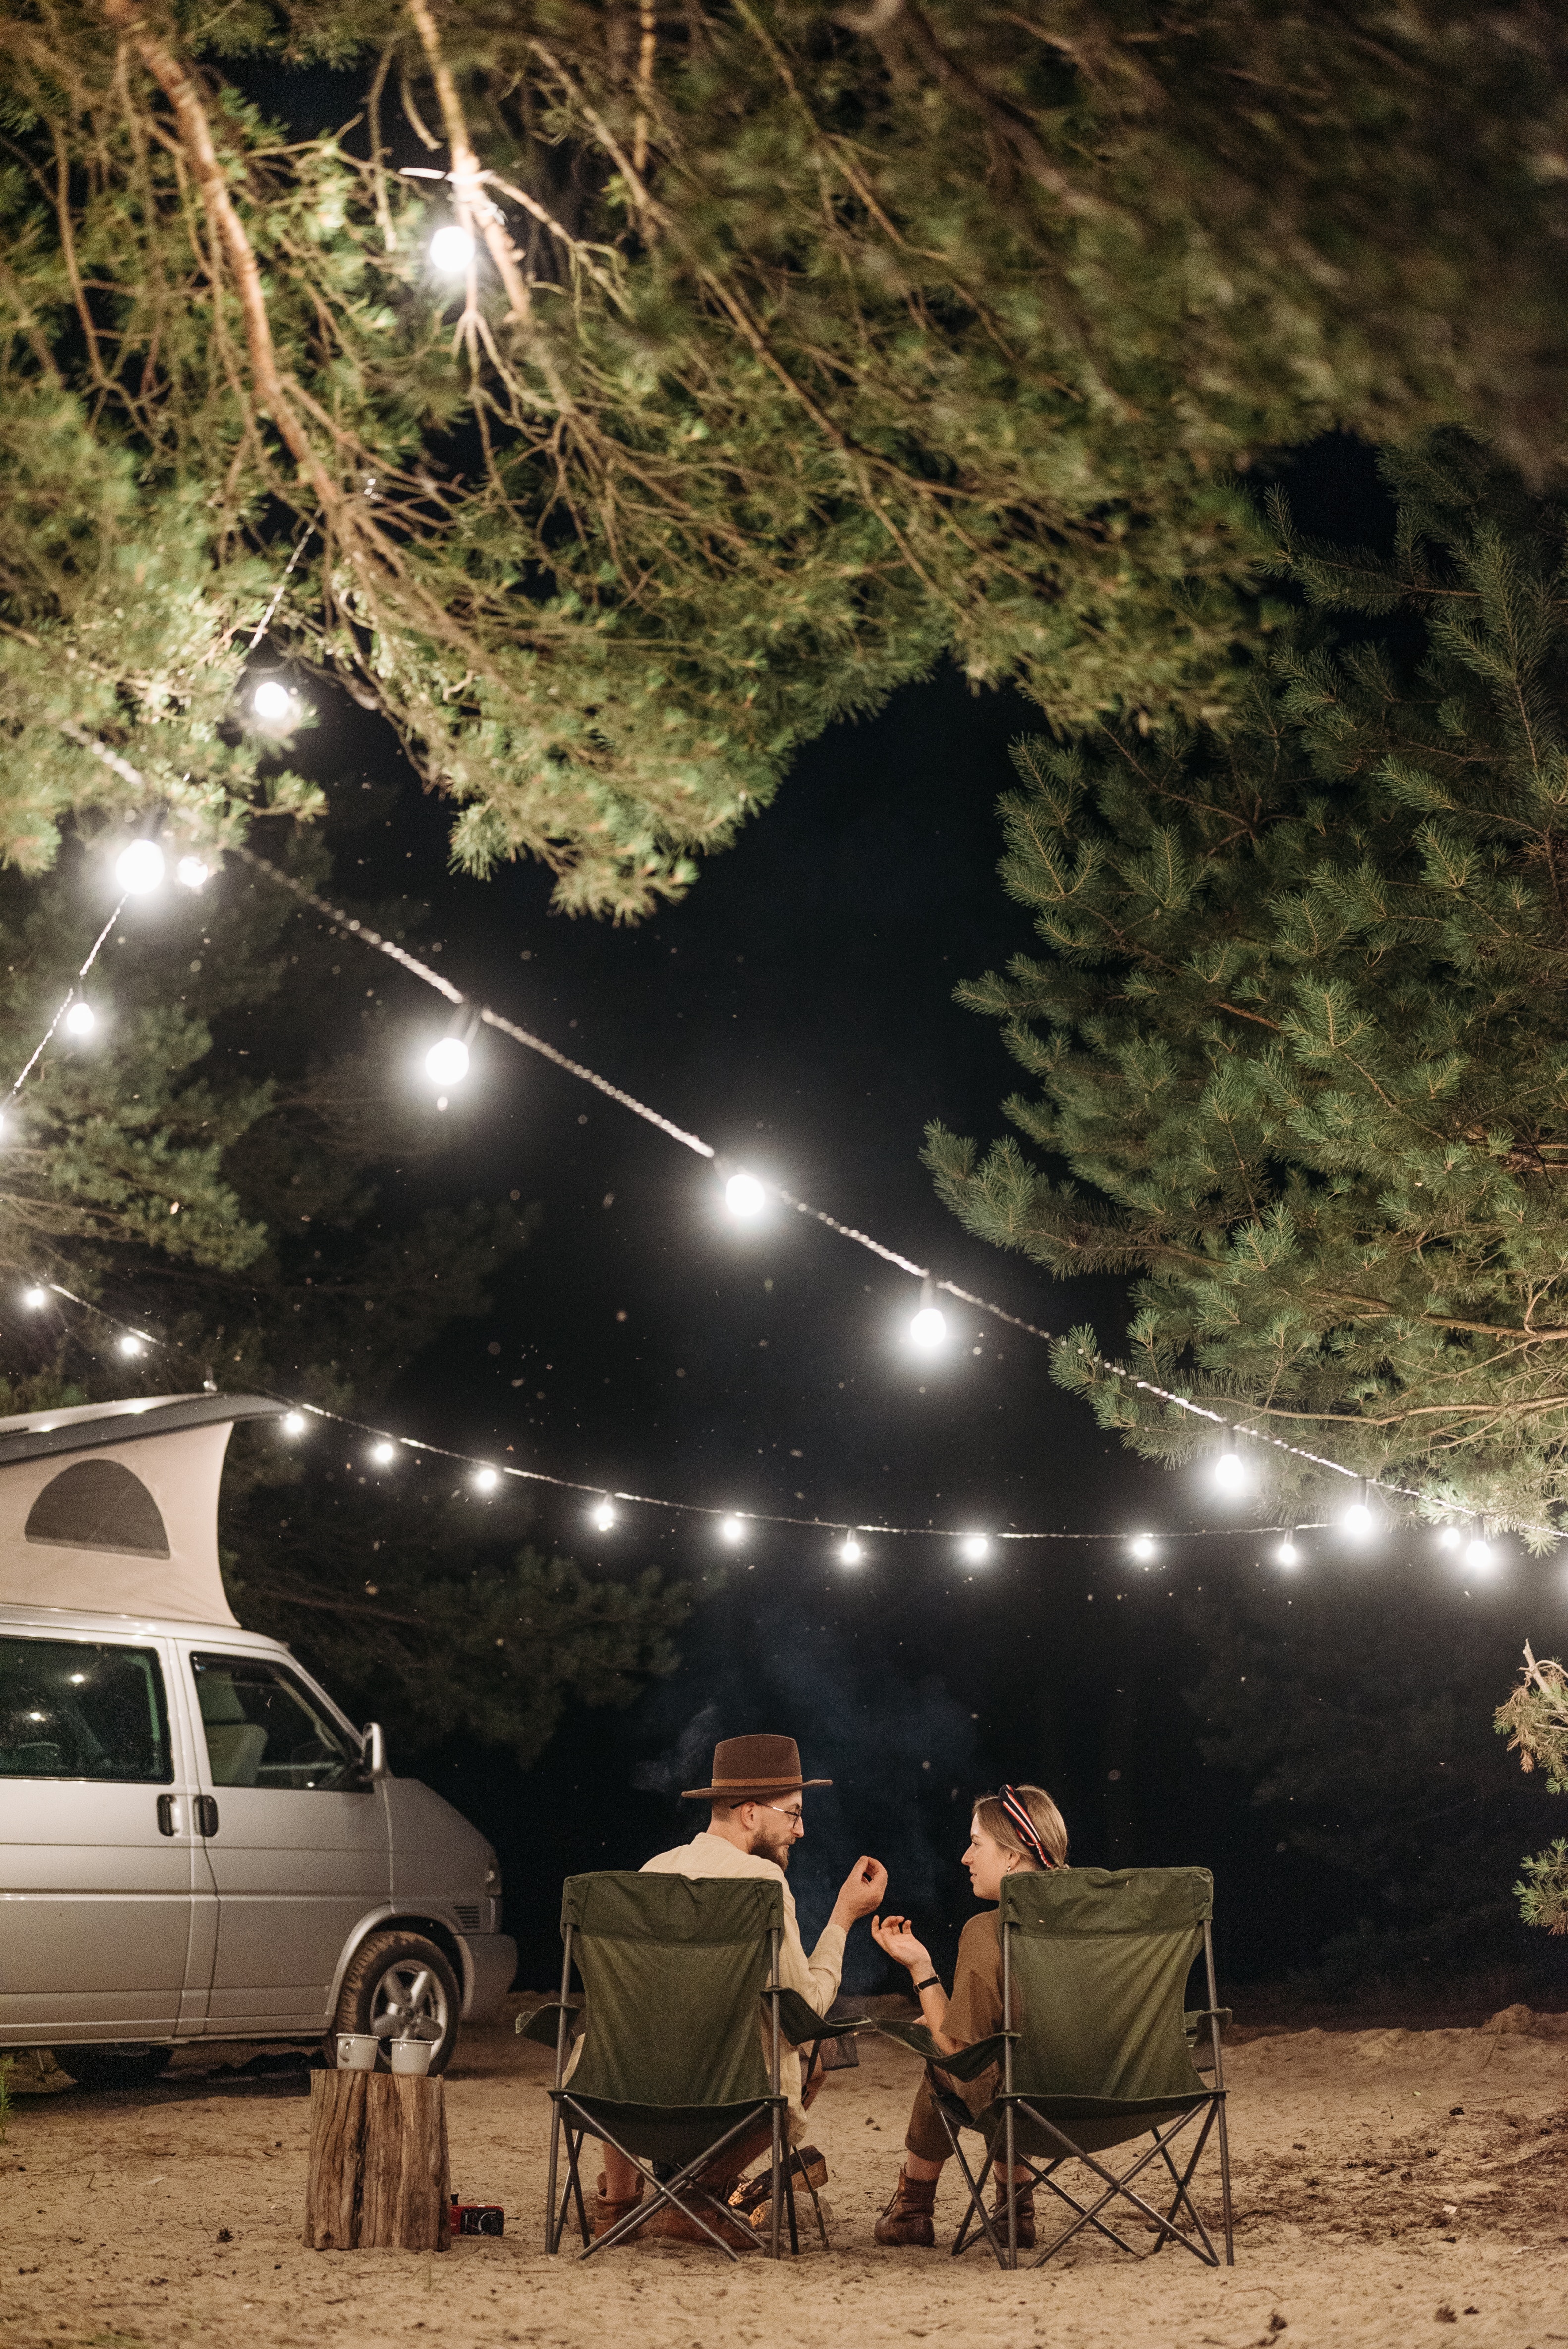 A couple camping and having a conversation. | Source: Pexels